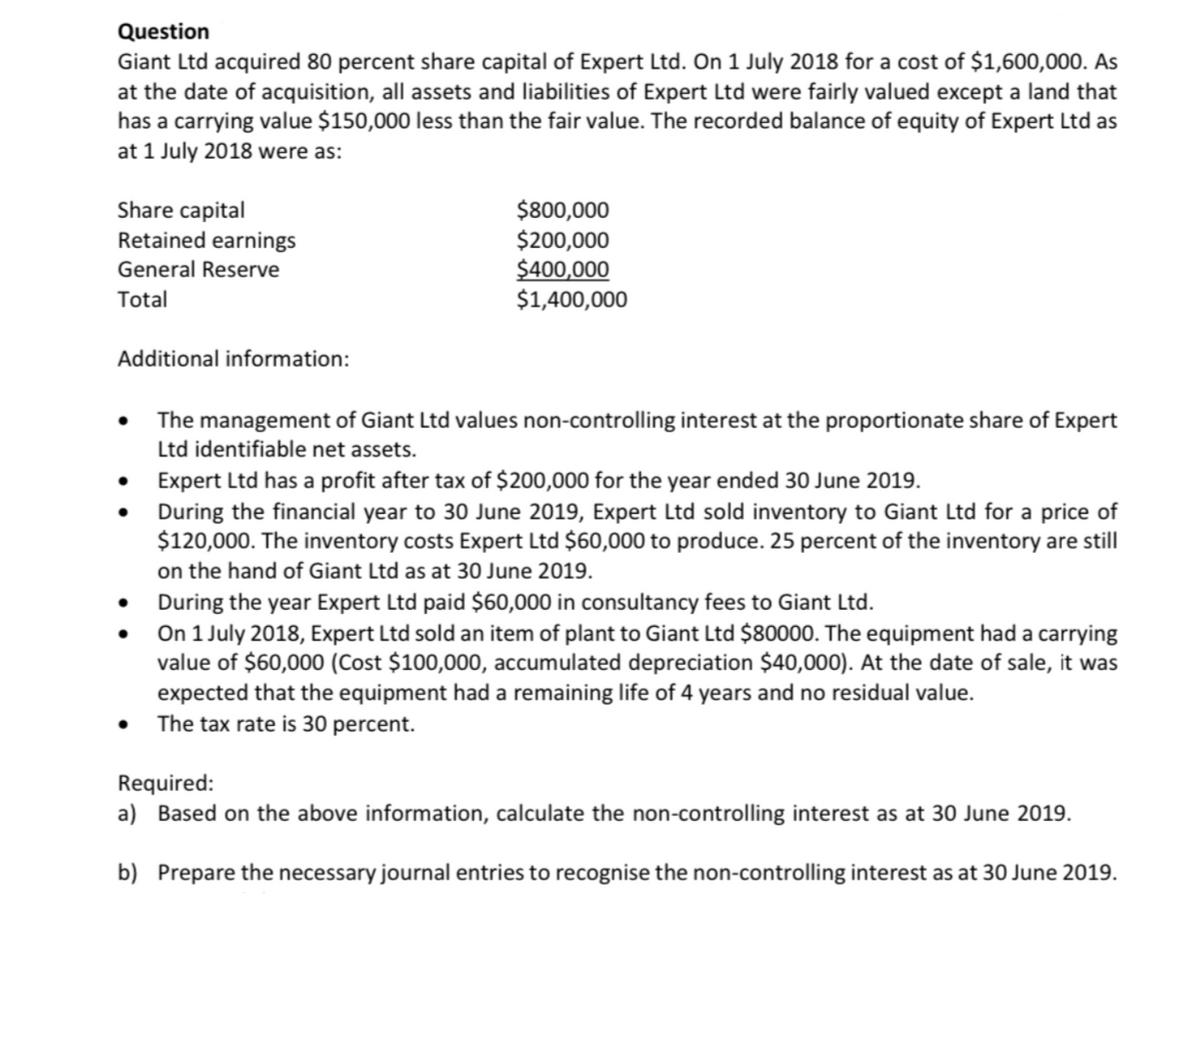 Question
Giant Ltd acquired 80 percent share capital of Expert Ltd. On 1 July 2018 for a cost of $1,600,000. As
at the date of acquisition, all assets and liabilities of Expert Ltd were fairly valued except a land that
has a carrying value $150,000 less than the fair value. The recorded balance of equity of Expert Ltd as
at 1 July 2018 were as:
Share capital
Retained earnings
$800,000
$200,000
$400,000
$1,400,000
General Reserve
Total
Additional information:
The management of Giant Ltd values non-controlling interest at the proportionate share of Expert
Ltd identifiable net assets.
• Expert Ltd has a profit after tax of $200,000 for the year ended 30 June 2019.
• During the financial year to 30 June 2019, Expert Ltd sold inventory to Giant Ltd for a price of
$120,000. The inventory costs Expert Ltd $60,000 to produce. 25 percent of the inventory are still
on the hand of Giant Ltd as at 30 June 2019.
• During the year Expert Ltd paid $60,000 in consultancy fees to Giant Ltd.
• On 1 July 2018, Expert Ltd sold an item of plant to Giant Ltd $80000. The equipment had a carrying
value of $60,000 (Cost $100,000, accumulated depreciation $40,000). At the date of sale, it was
expected that the equipment had a remaining life of 4 years and no residual value.
• The tax rate is 30 percent.
Required:
a) Based on the above information, calculate the non-controlling interest as at 30 June 2019.
b) Prepare the necessary journal entries to recognise the non-controlling interest as at 30 June 2019.
